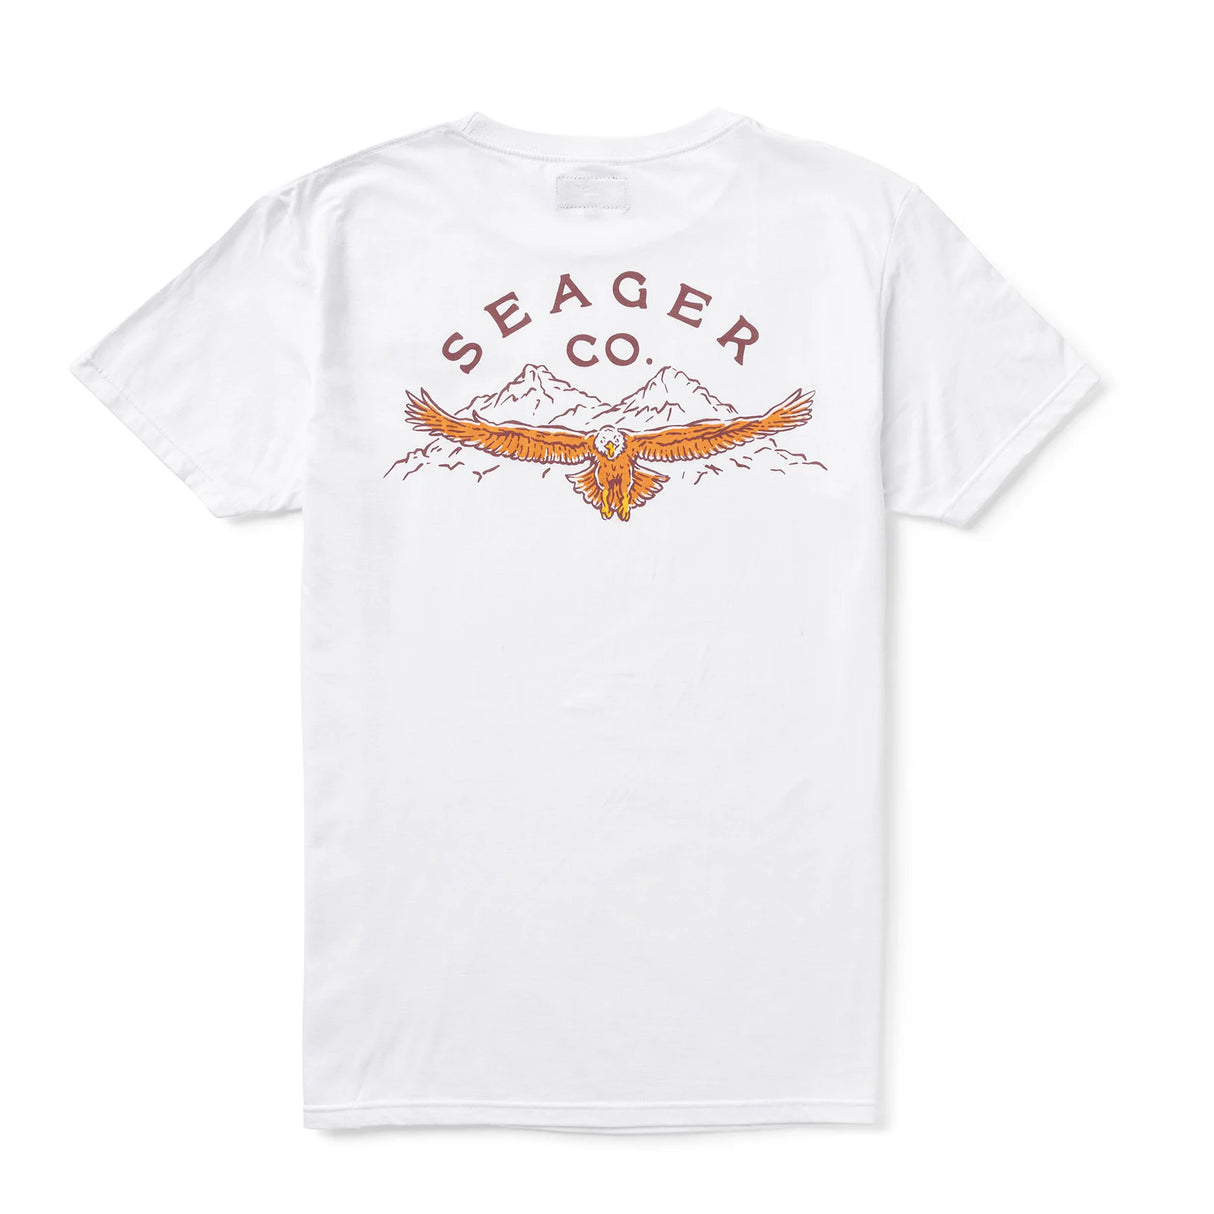 Seager Soarin' Vintage White S/s Shirt